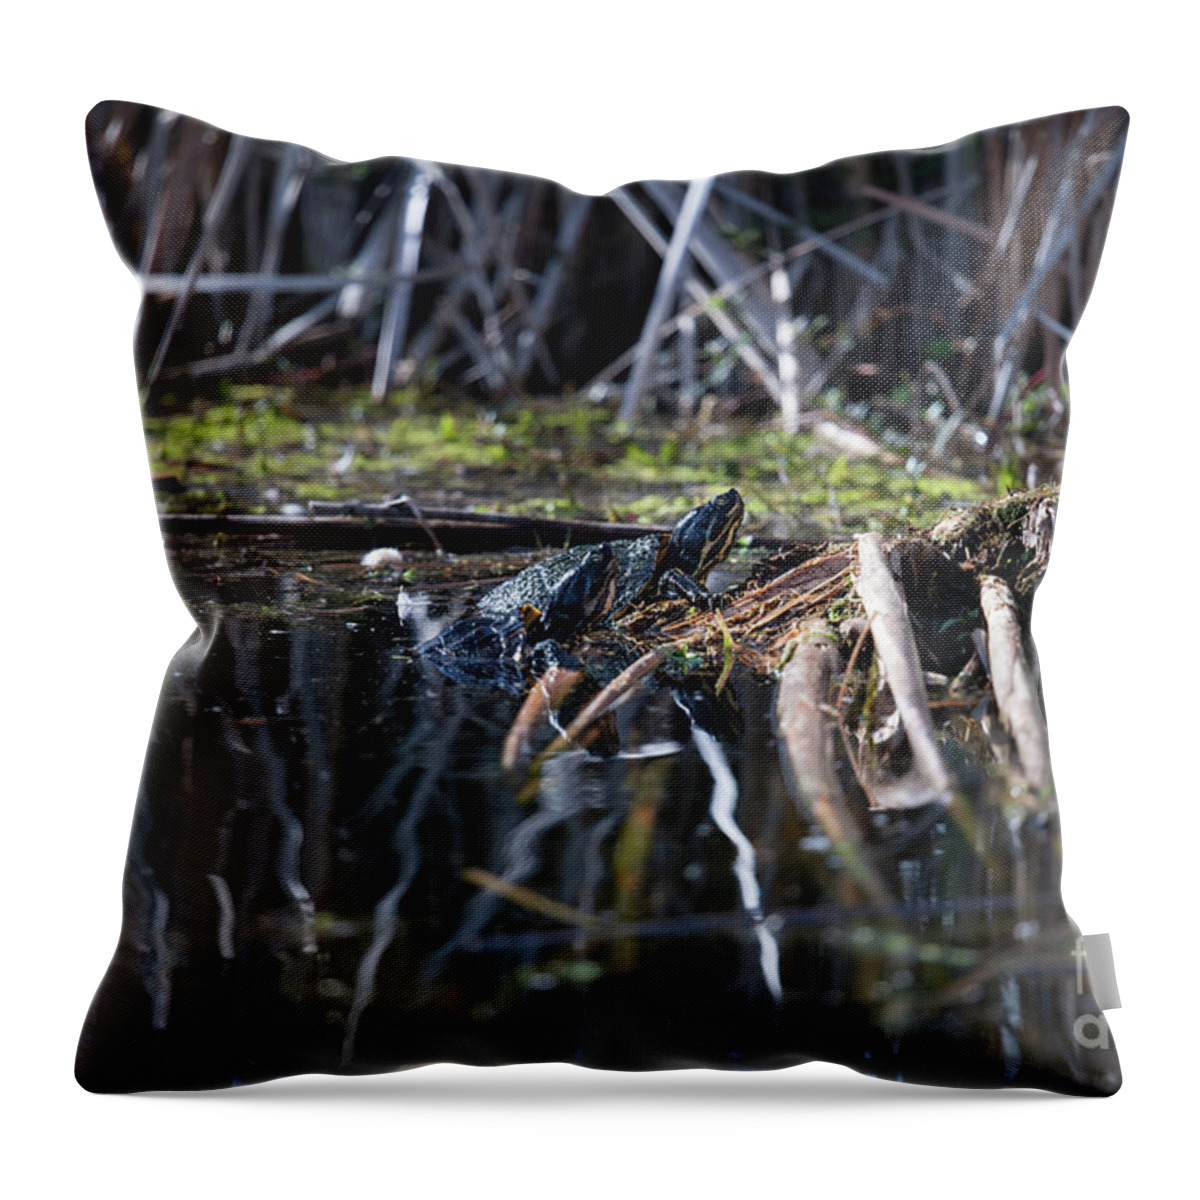 Turtle Throw Pillow featuring the photograph Turtle Dock by Dale Powell